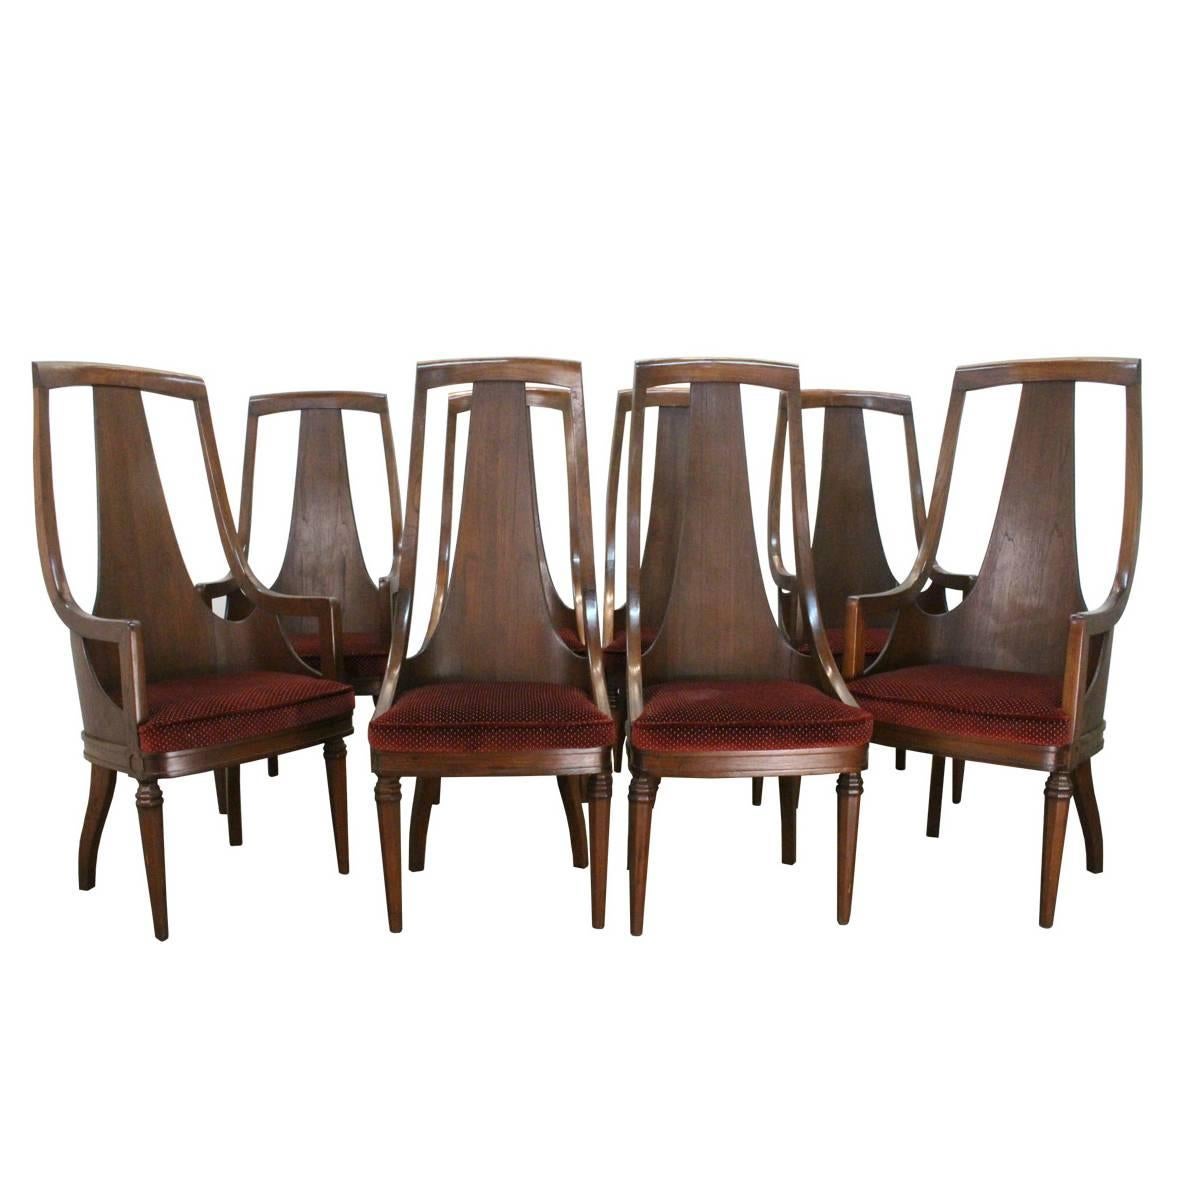 Set of 8 High Back Mid-Century Walnut Dining Chairs